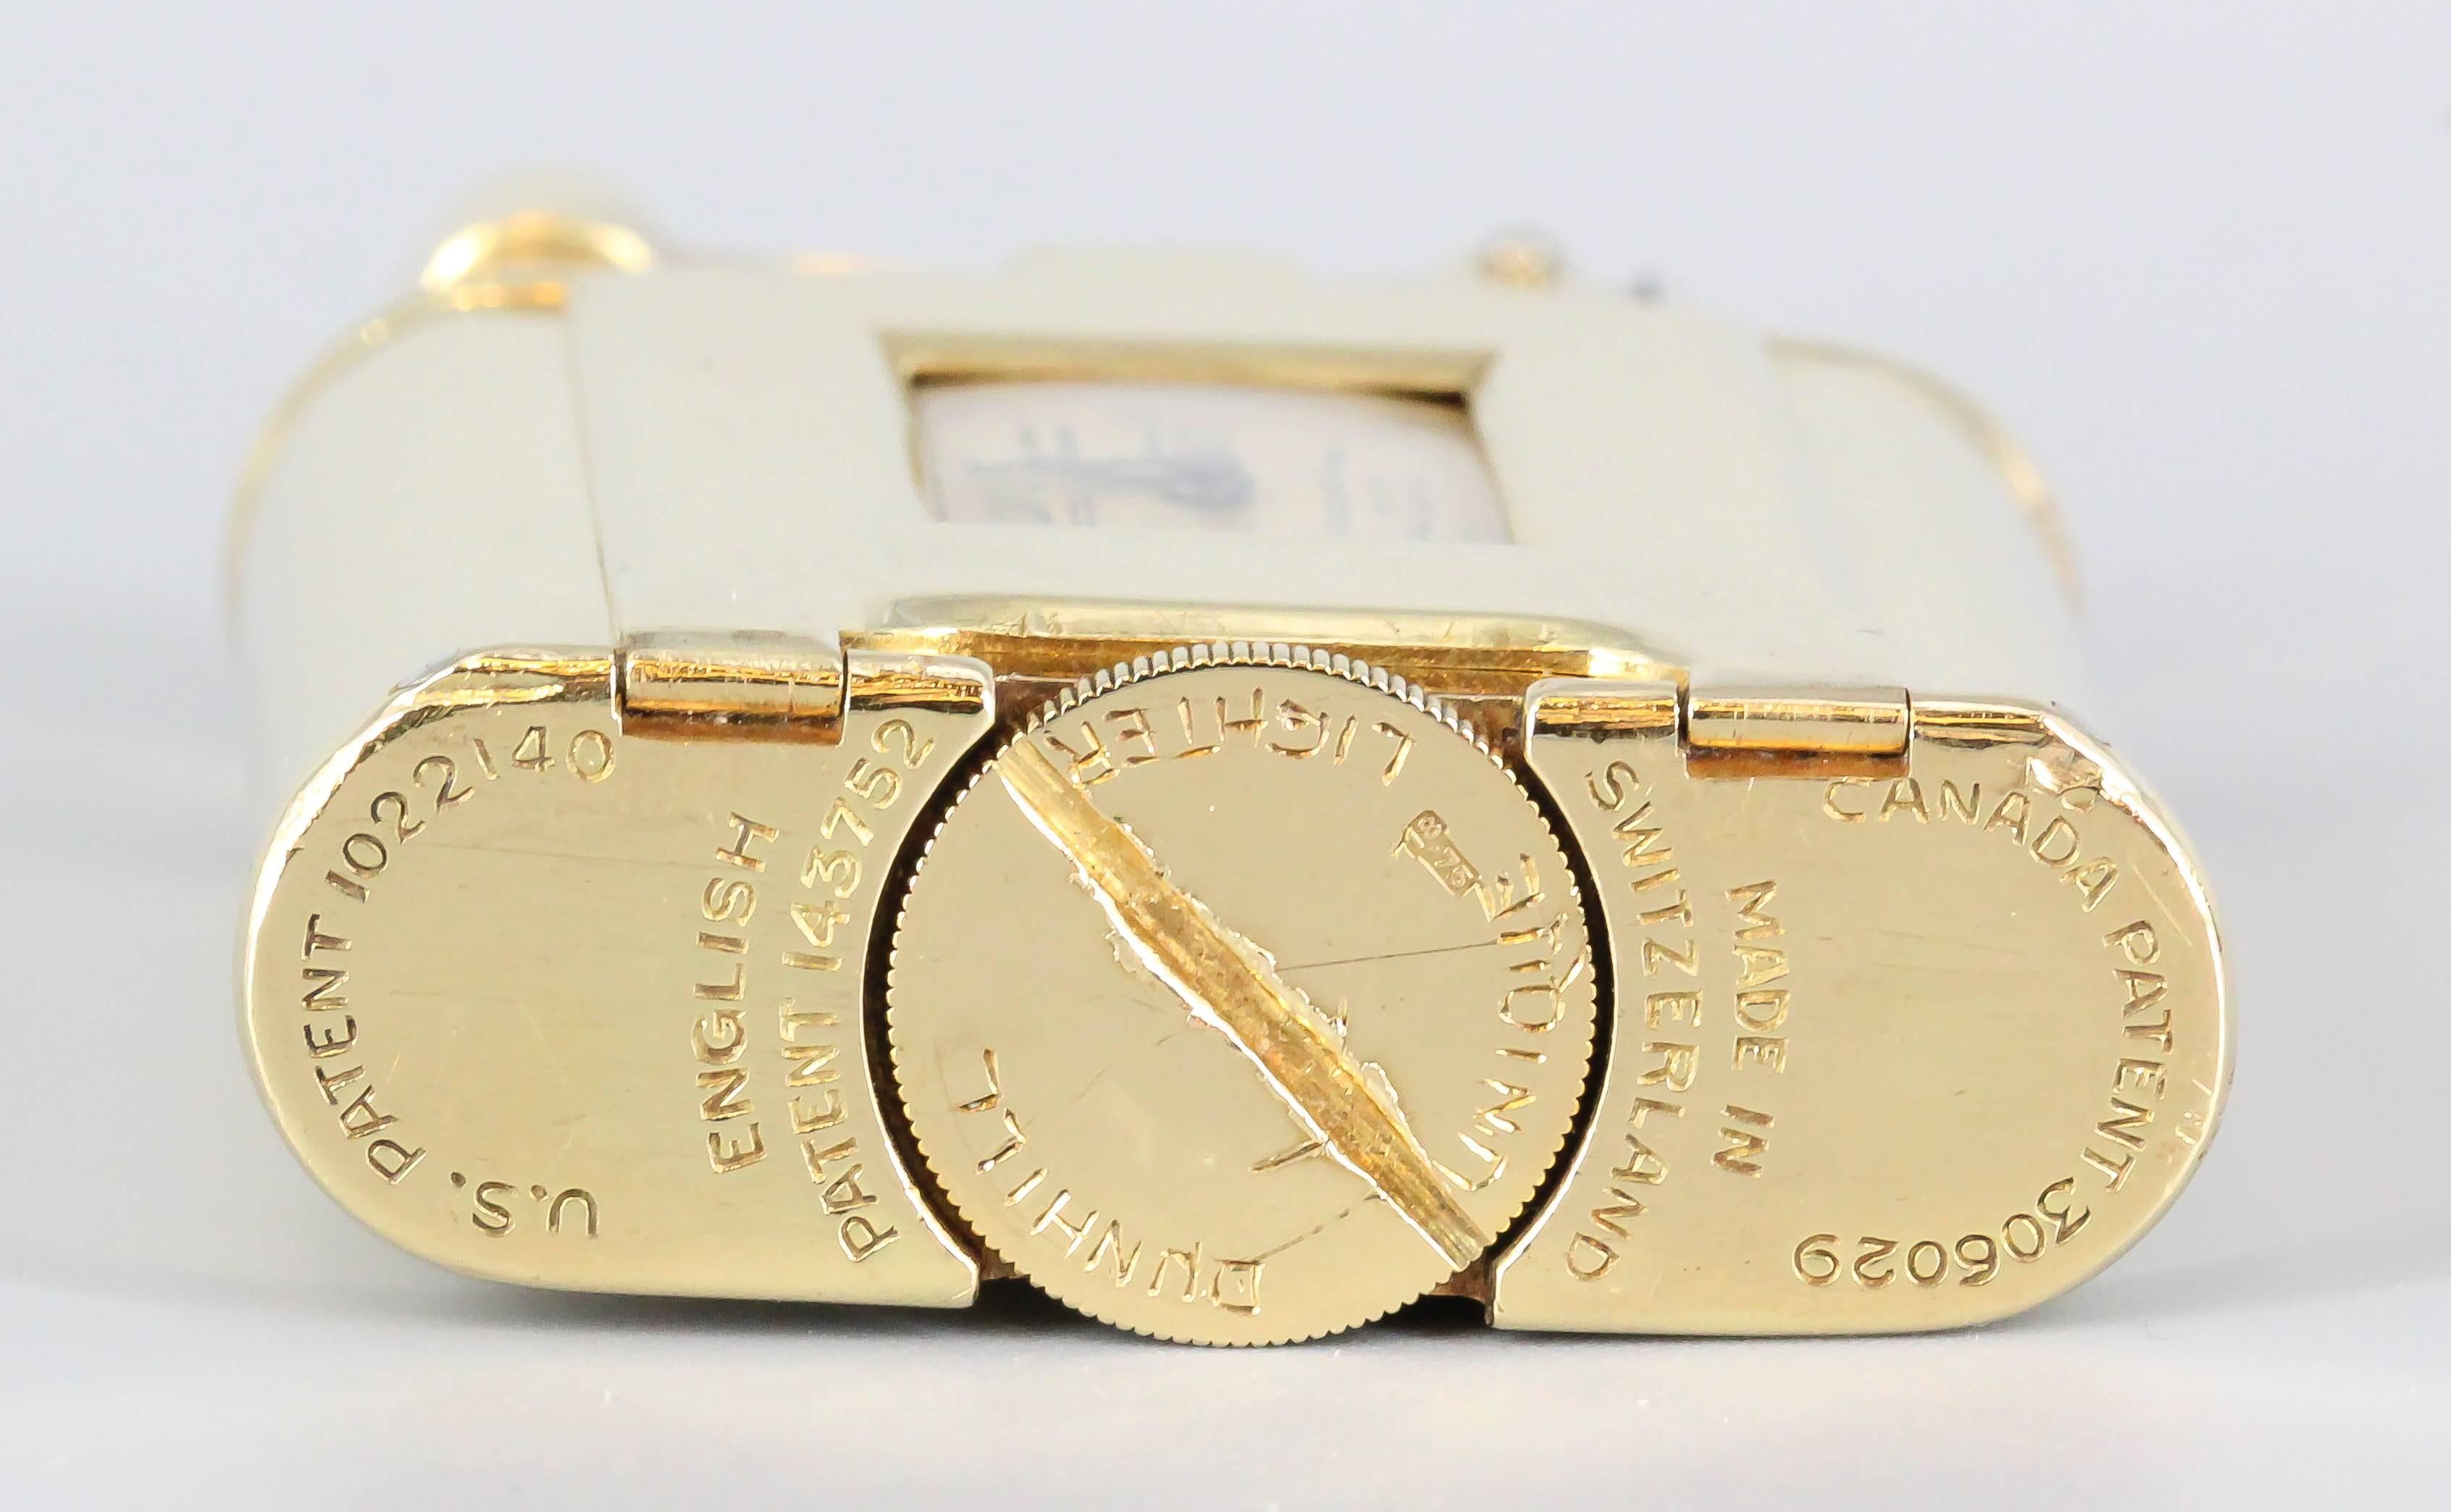 Rare 18K yellow gold lighter watch by Dunhill, circa 1940s. Unusual to find these in 18k gold. Watch is 15 jewels, manual wind. Case numbers all match. A very fine example and very collectible.

Hallmarks: Dunhill Unique Lighter, Made in